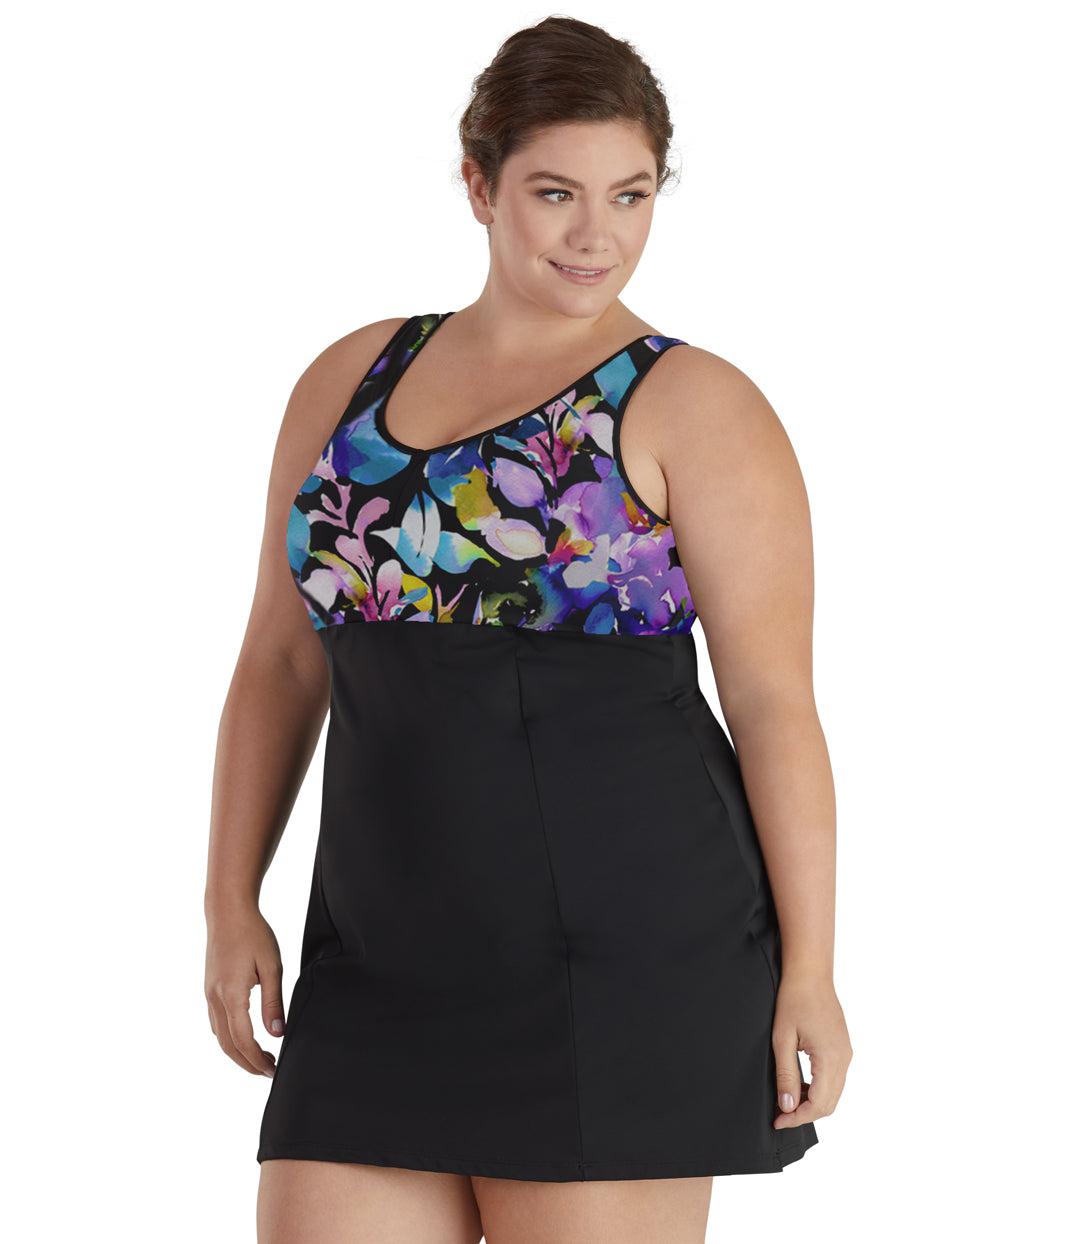 Plus size woman, facing front, wearing JunoActive plus size QuikEnergy Swim Dress South Pacific Black. The top of swim dress is a multi colored watercolor floral print. The bottom of the dress is solid black, has a slight a-line shape and ends mid-thigh.